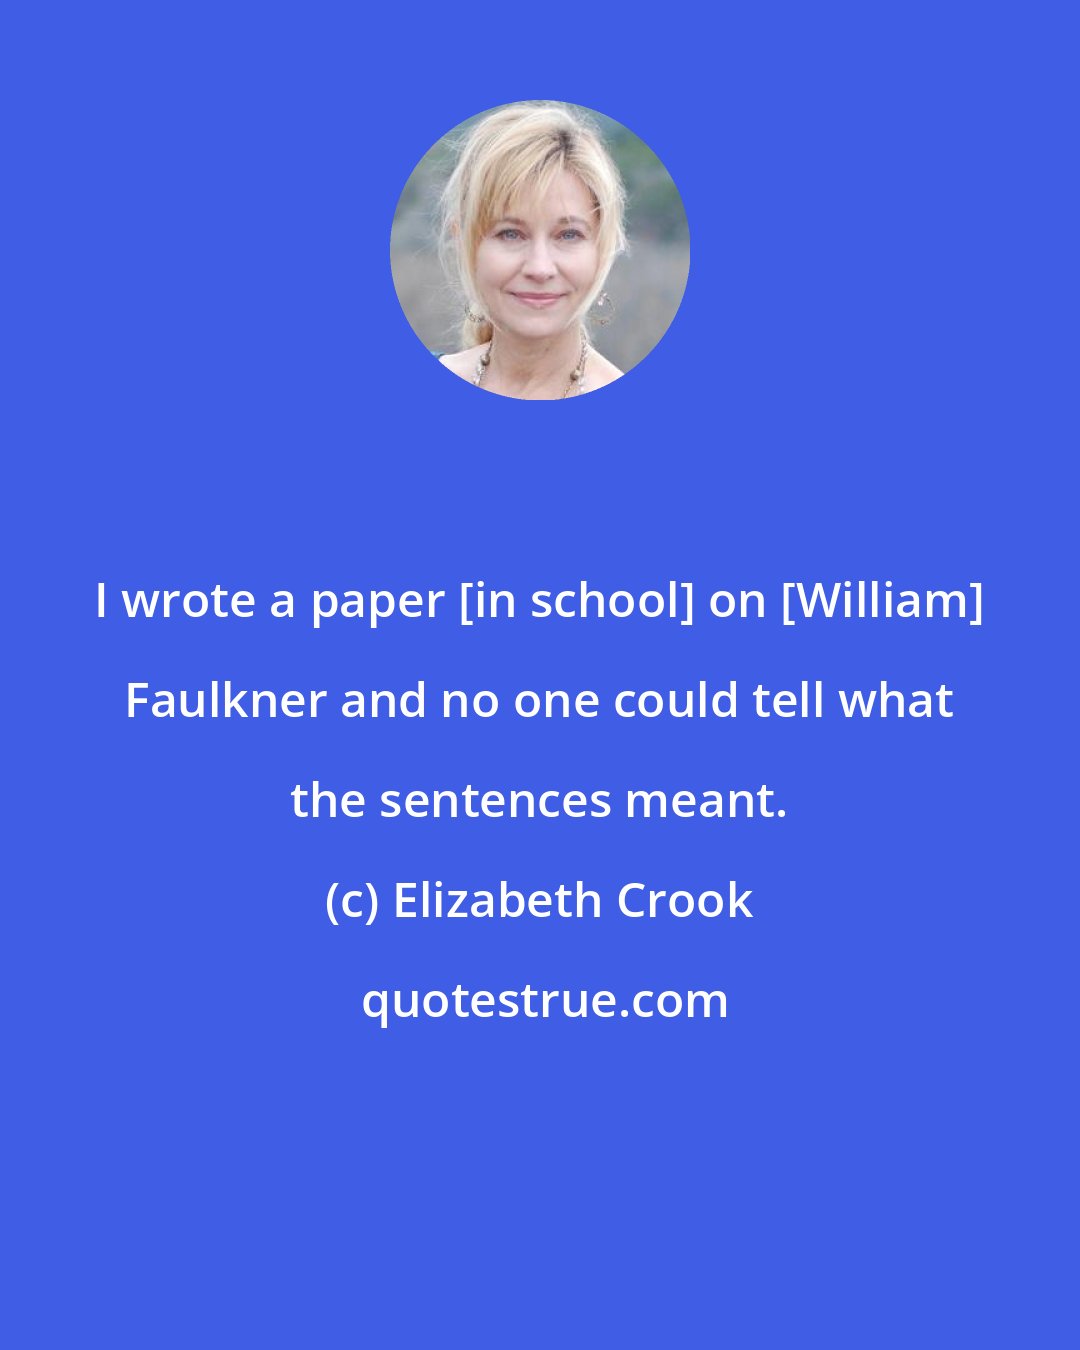 Elizabeth Crook: I wrote a paper [in school] on [William] Faulkner and no one could tell what the sentences meant.